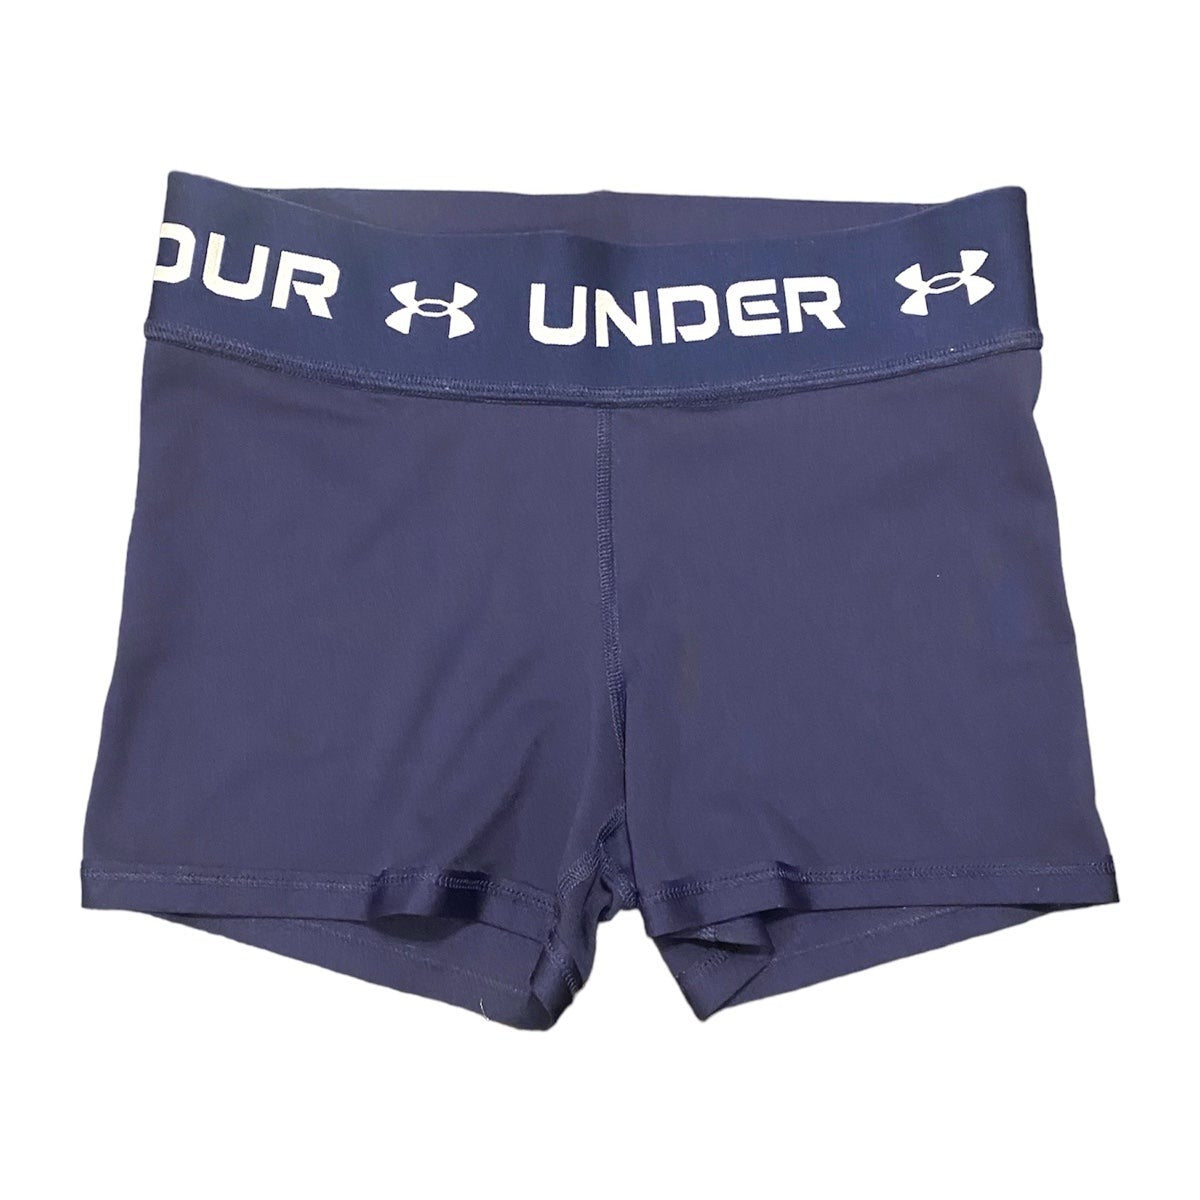 Under Armour reversible shorts